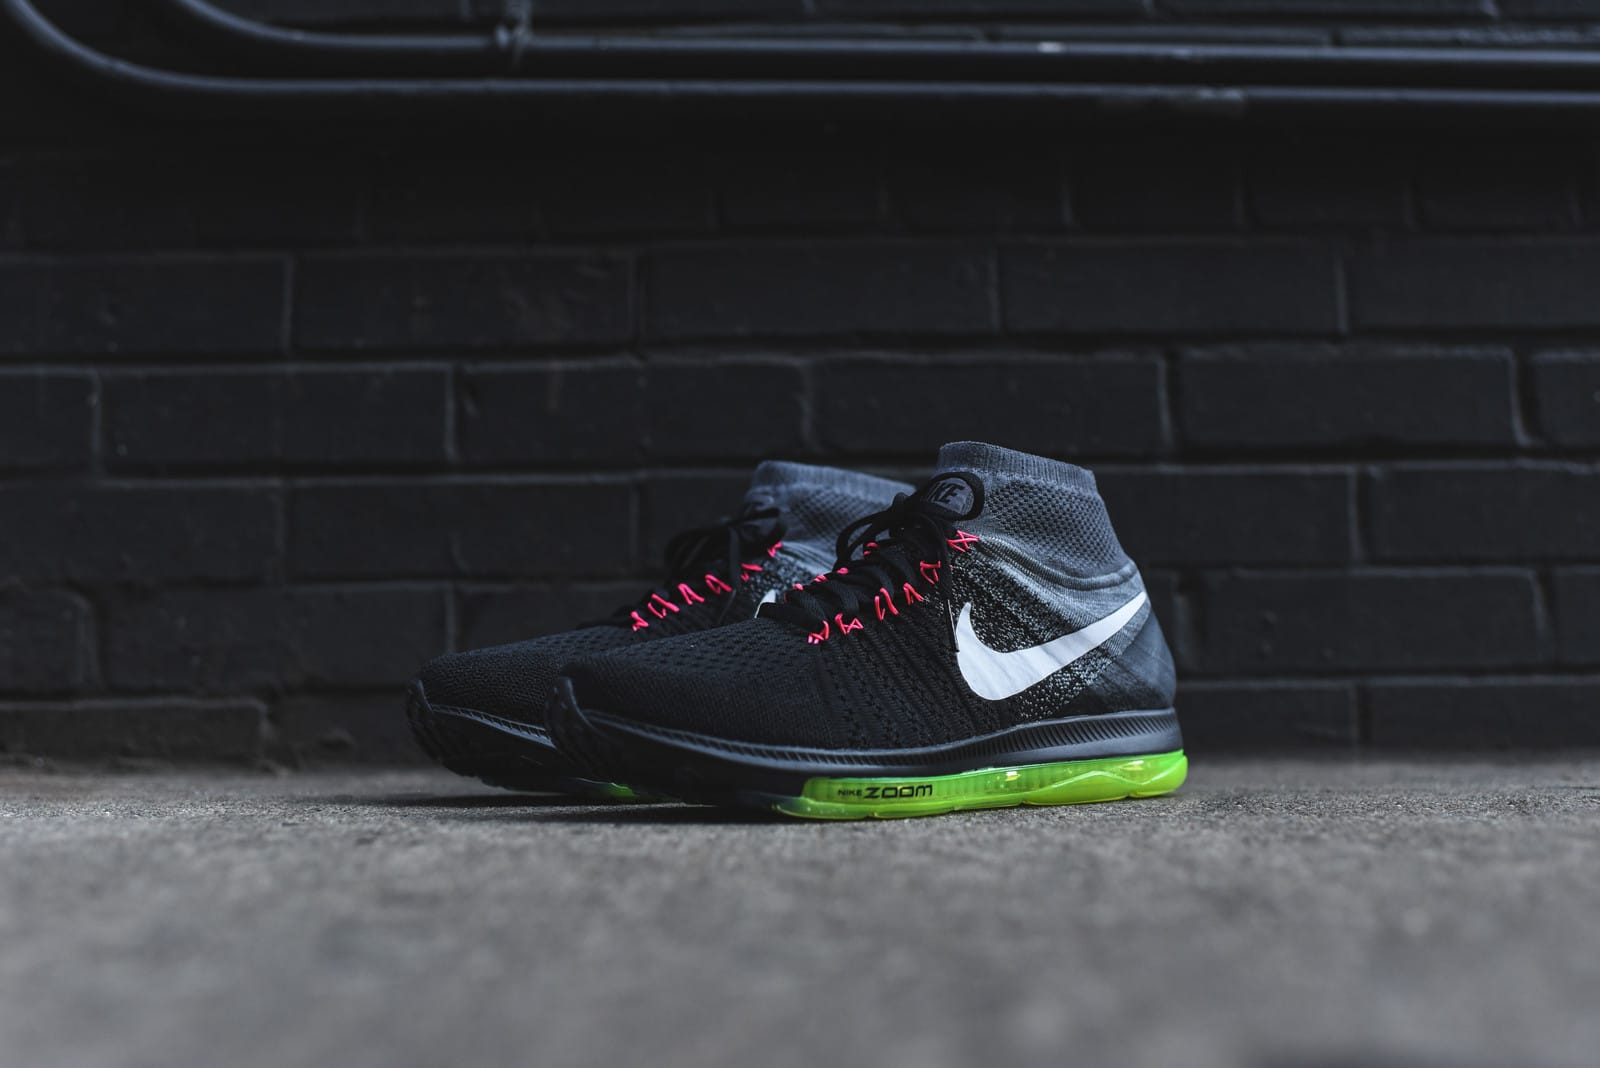 Nike_Zoom_All_Out_Flyknit_Pre_Heat_Black_Grey_Volt_3